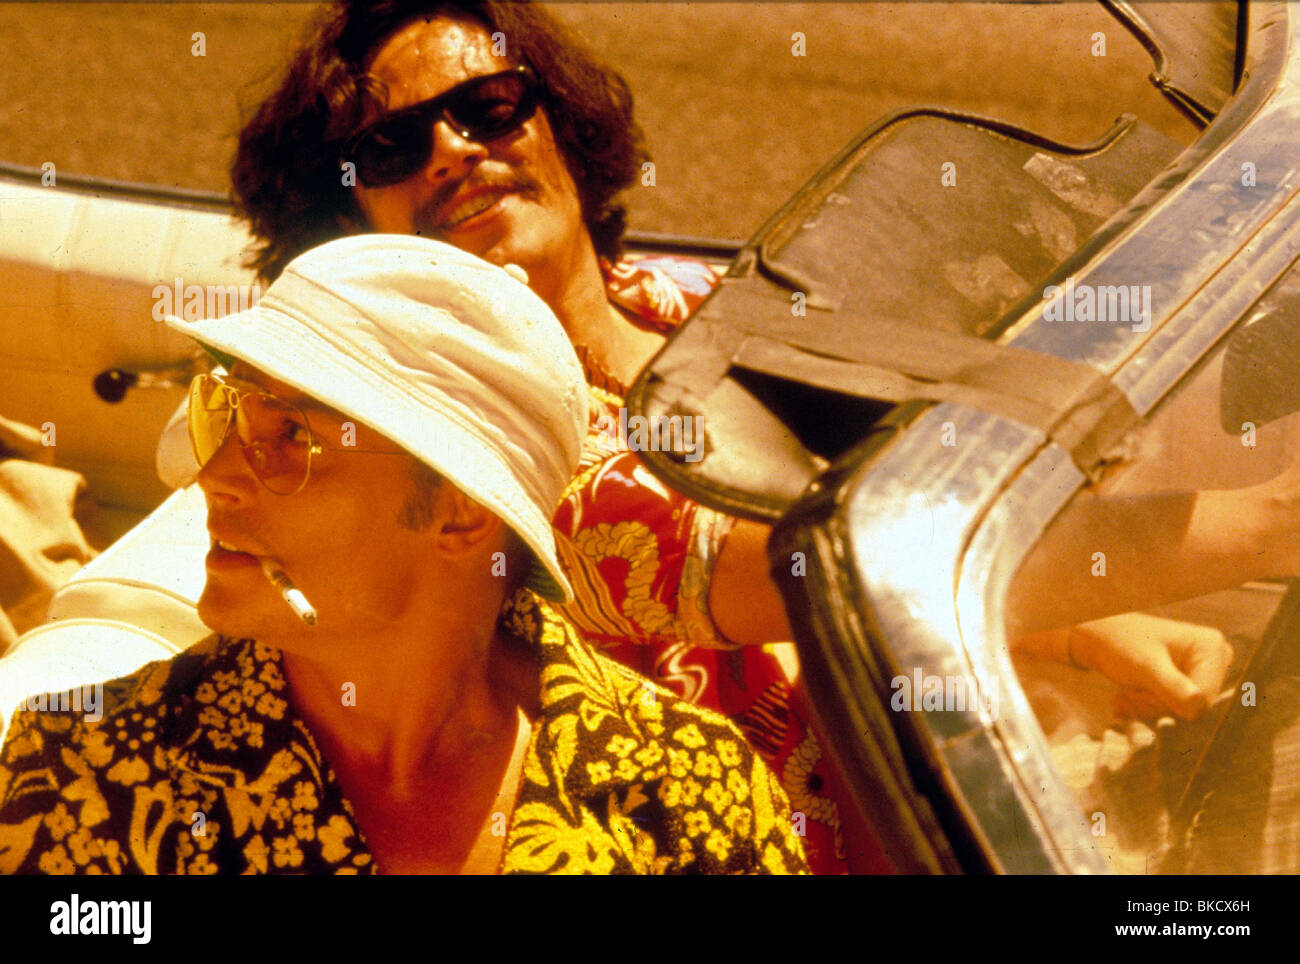 JOHNNY DEPP FEAR LOATHING LAS VEGAS MOVIE 8x10 PICTURE  ACTOR RARE PHOTO 